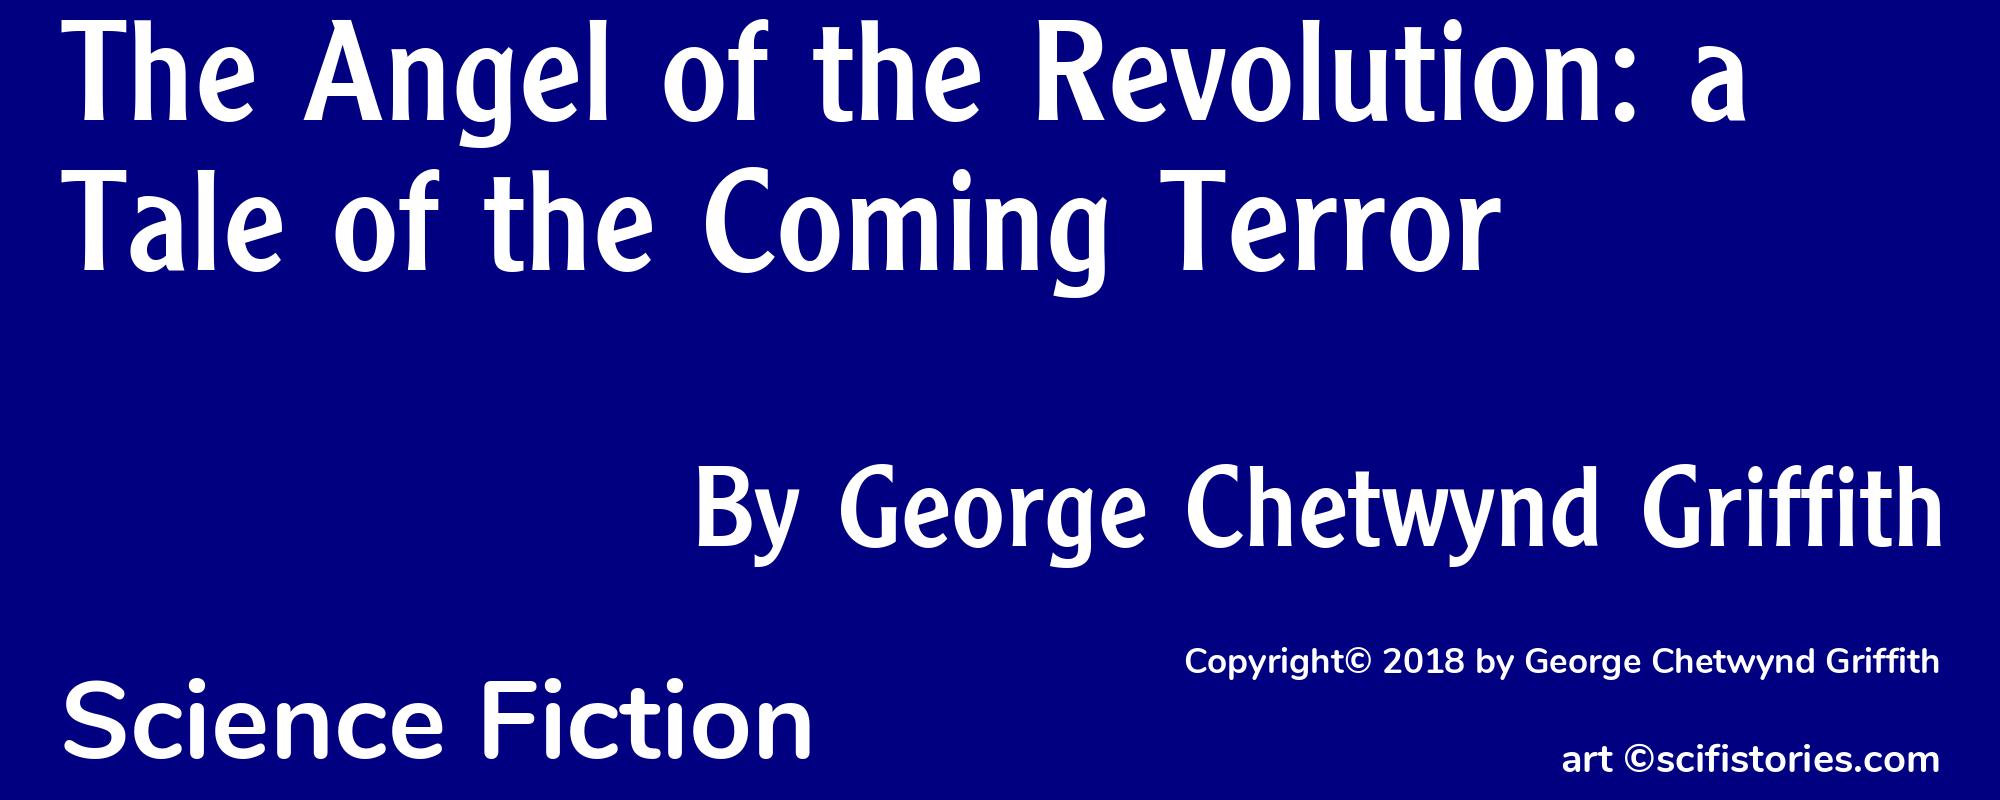 The Angel of the Revolution: a Tale of the Coming Terror - Cover